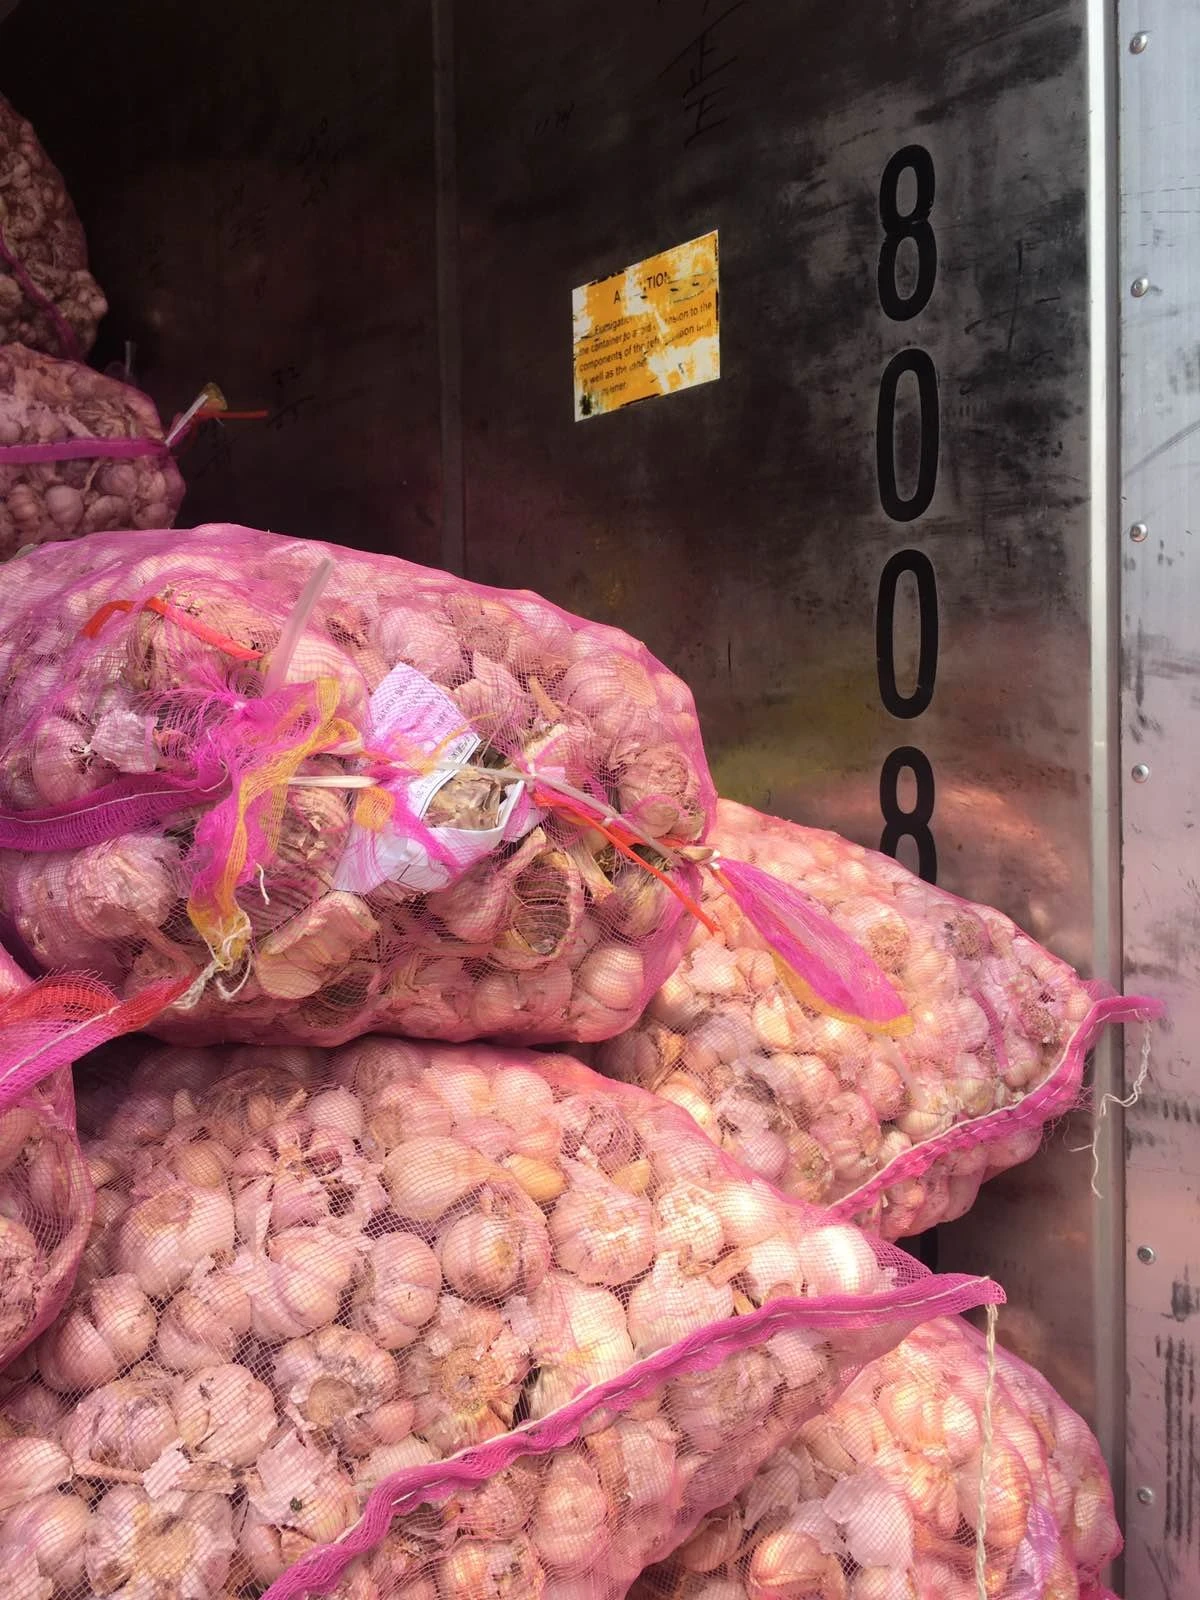 Good Selling Price Agricultural Vegetables And Spices Fresh Garlic From Trung My Company Viet Nam